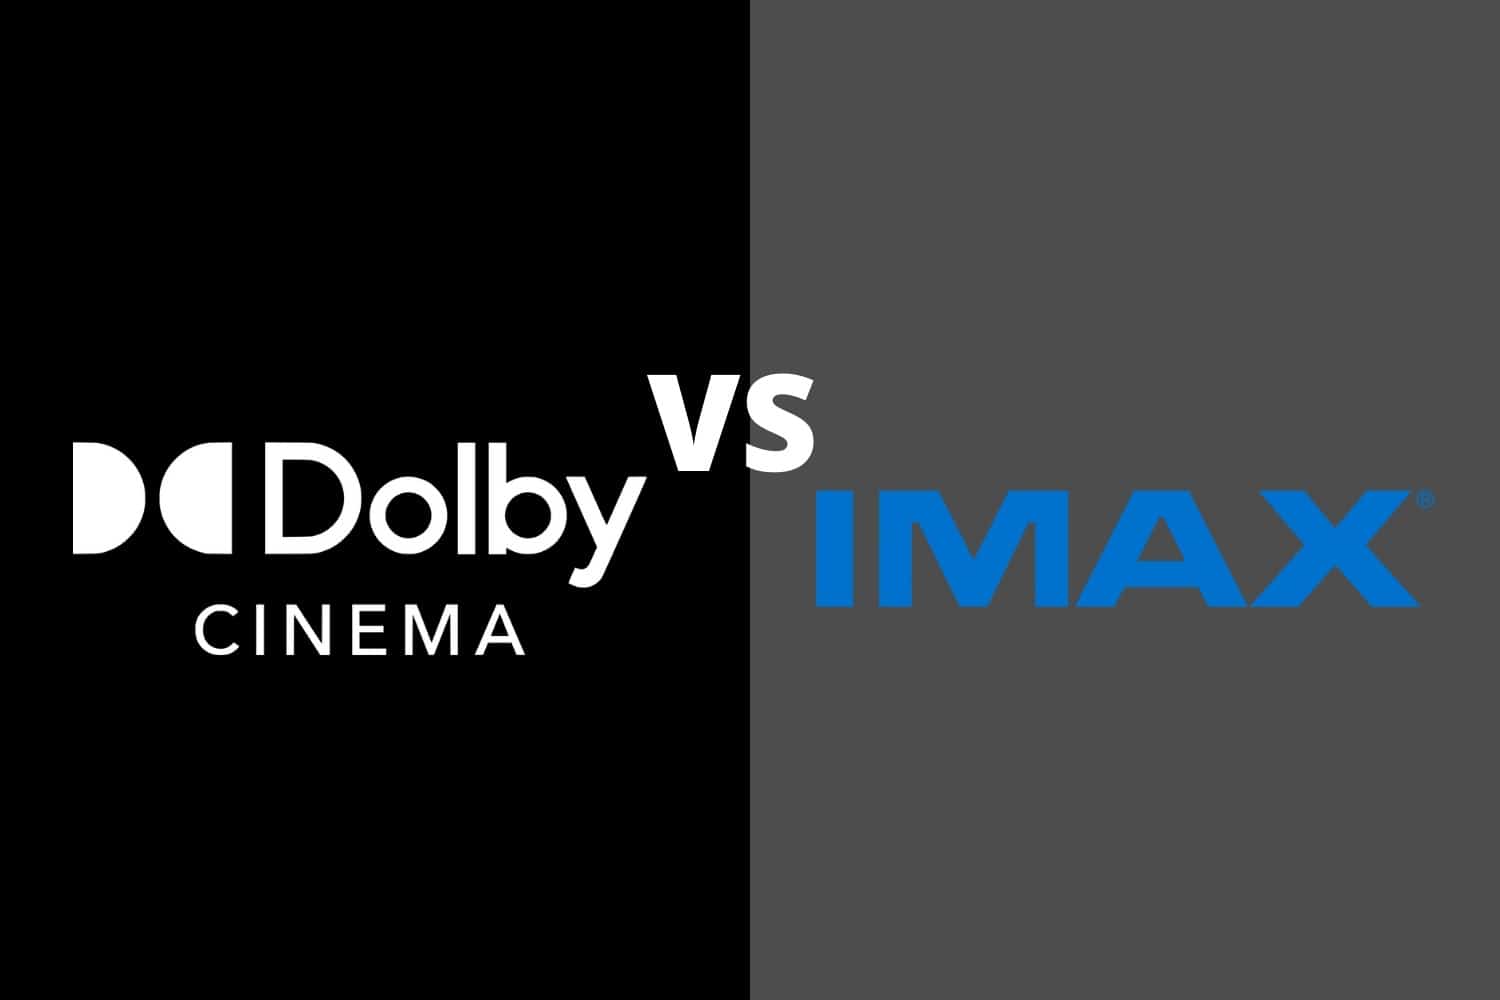 Avatar 2 Cinema Formats: IMAX, 3D, Dolby & more